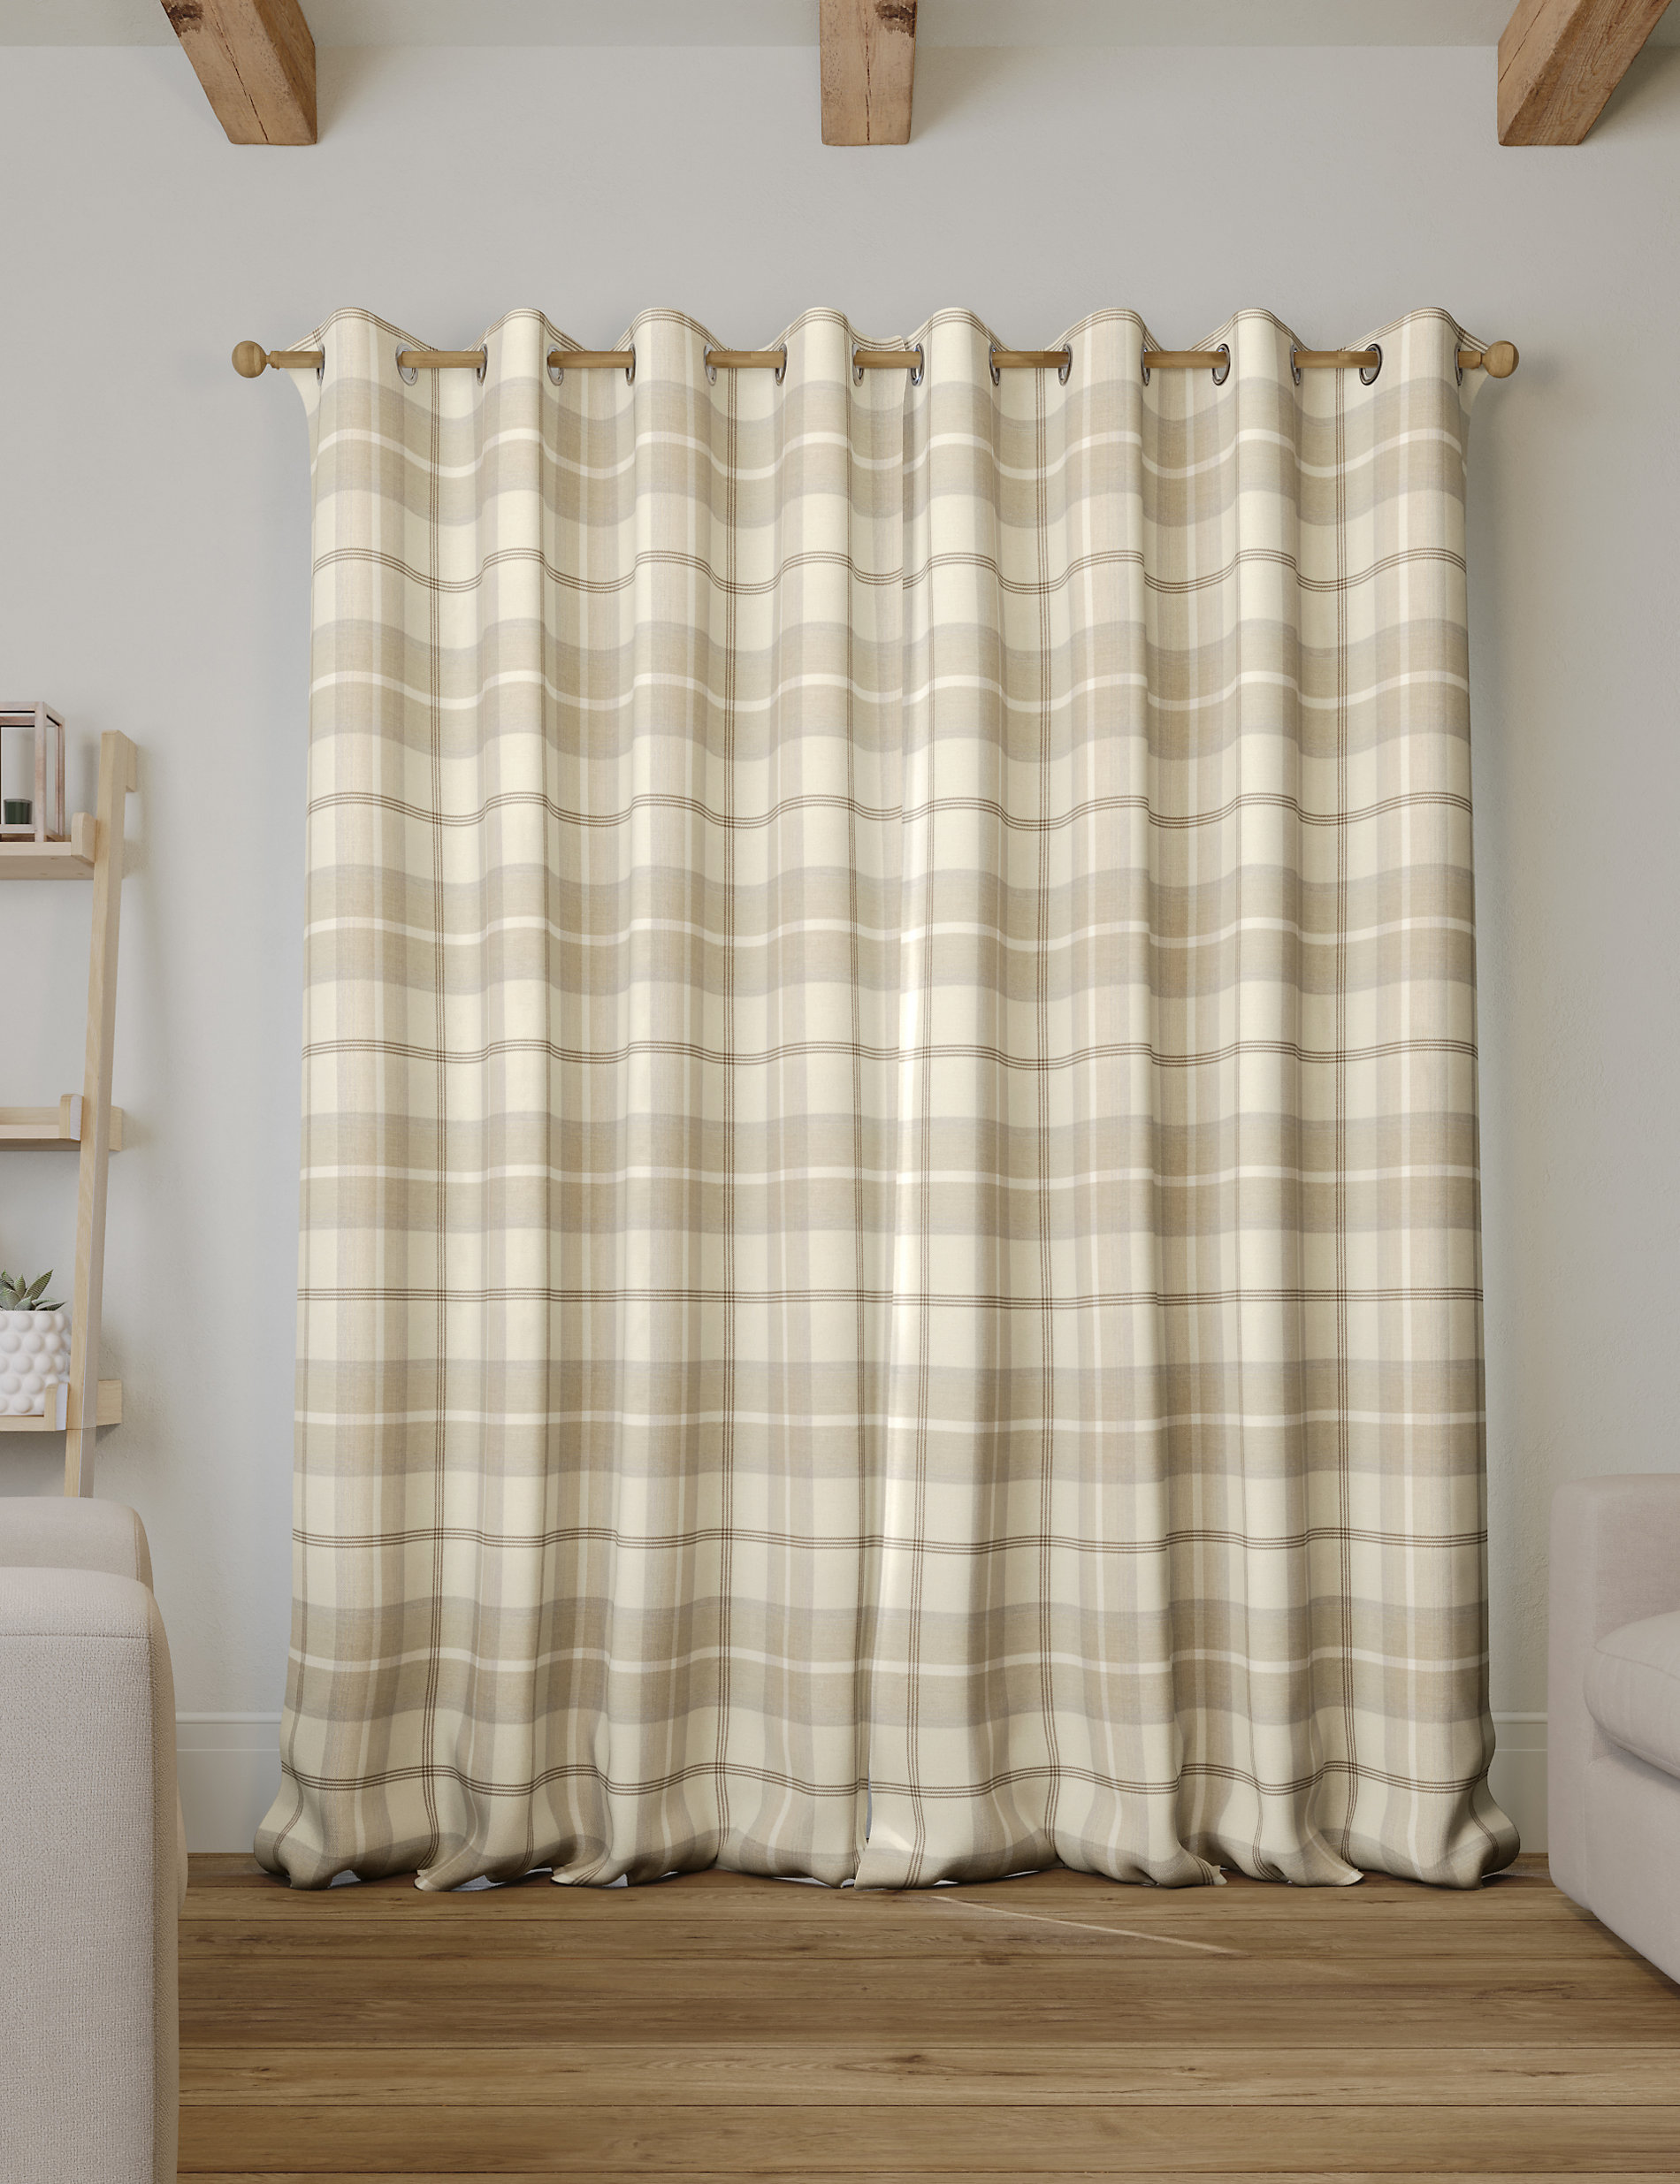 Brushed Woven Checked Eyelet Curtains